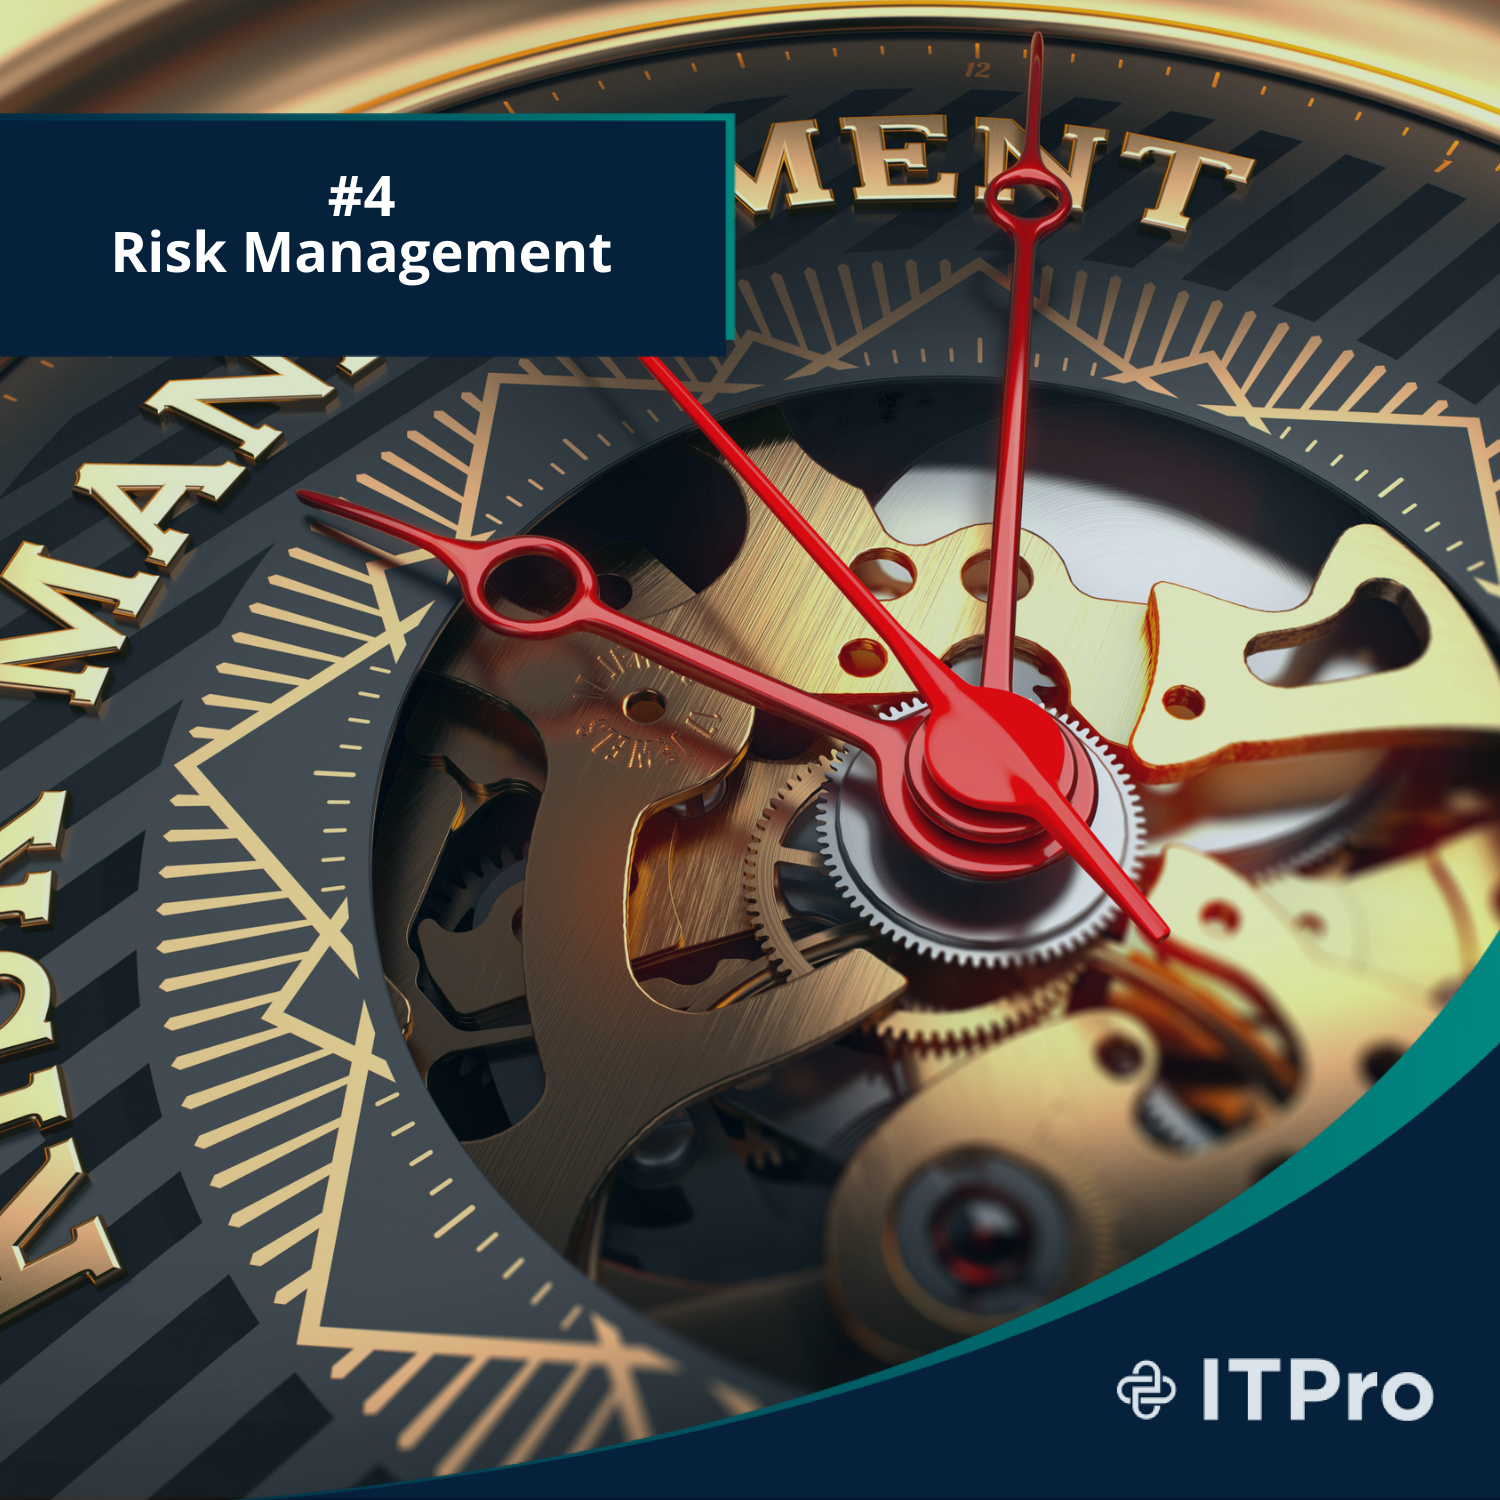 #5 Risk Management: How IT Pro Leverages Expertise to Mitigate Cybersecurity Threats, Protect Data, and Prevent System Failures